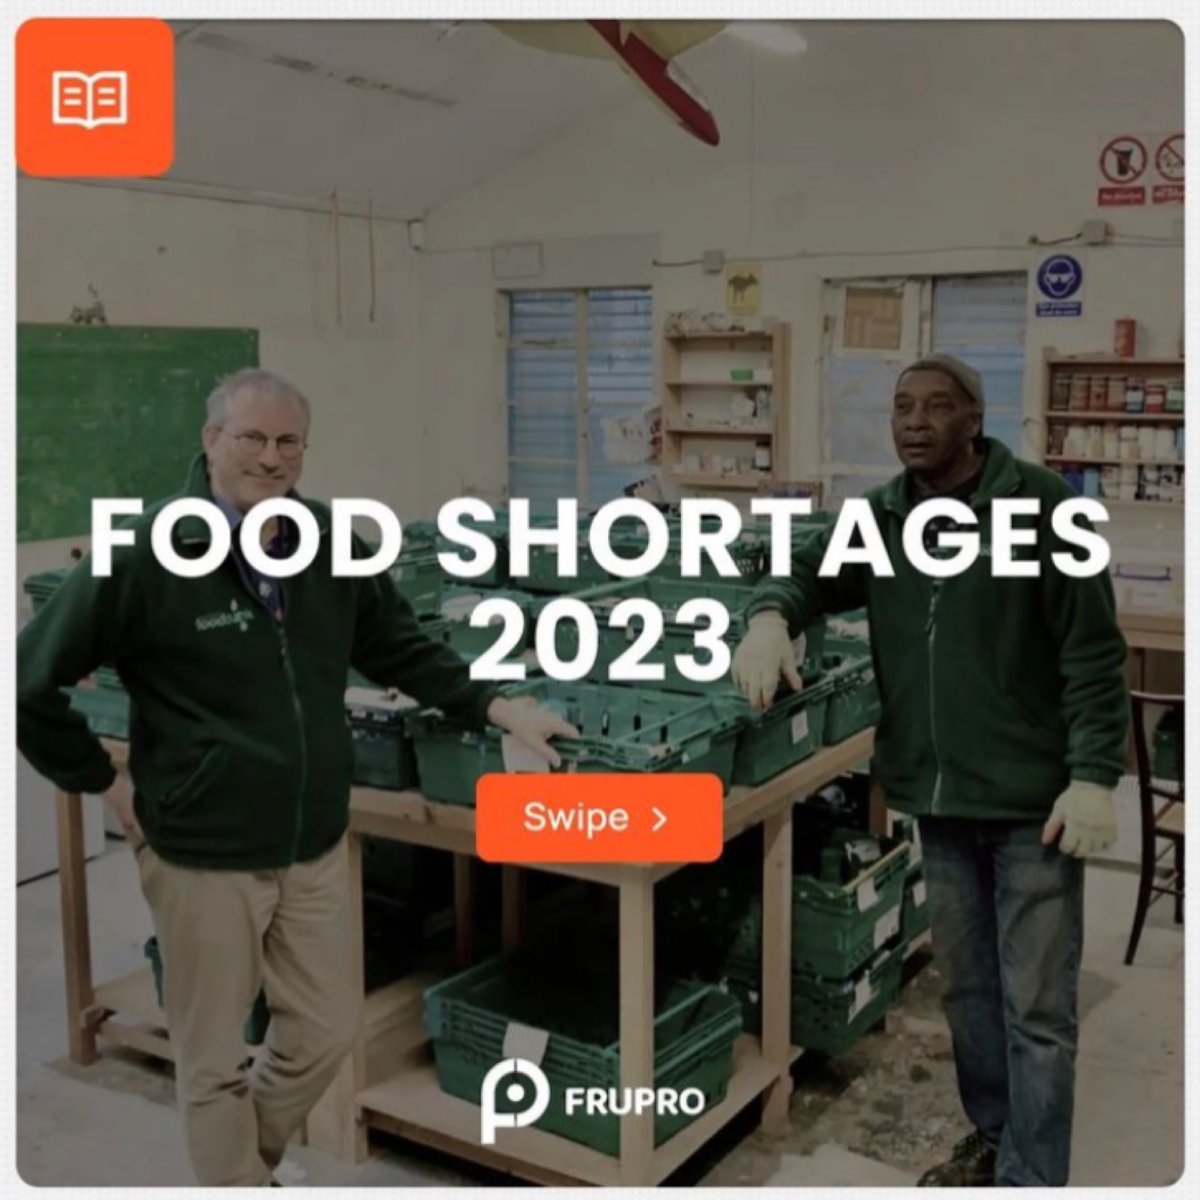 @fruproworld interviewed our CEO Chris Price to delve into the big question ‘What is happening in the UK with food shortages?’ Read the interview here: frupro.com/blog/food-shor…